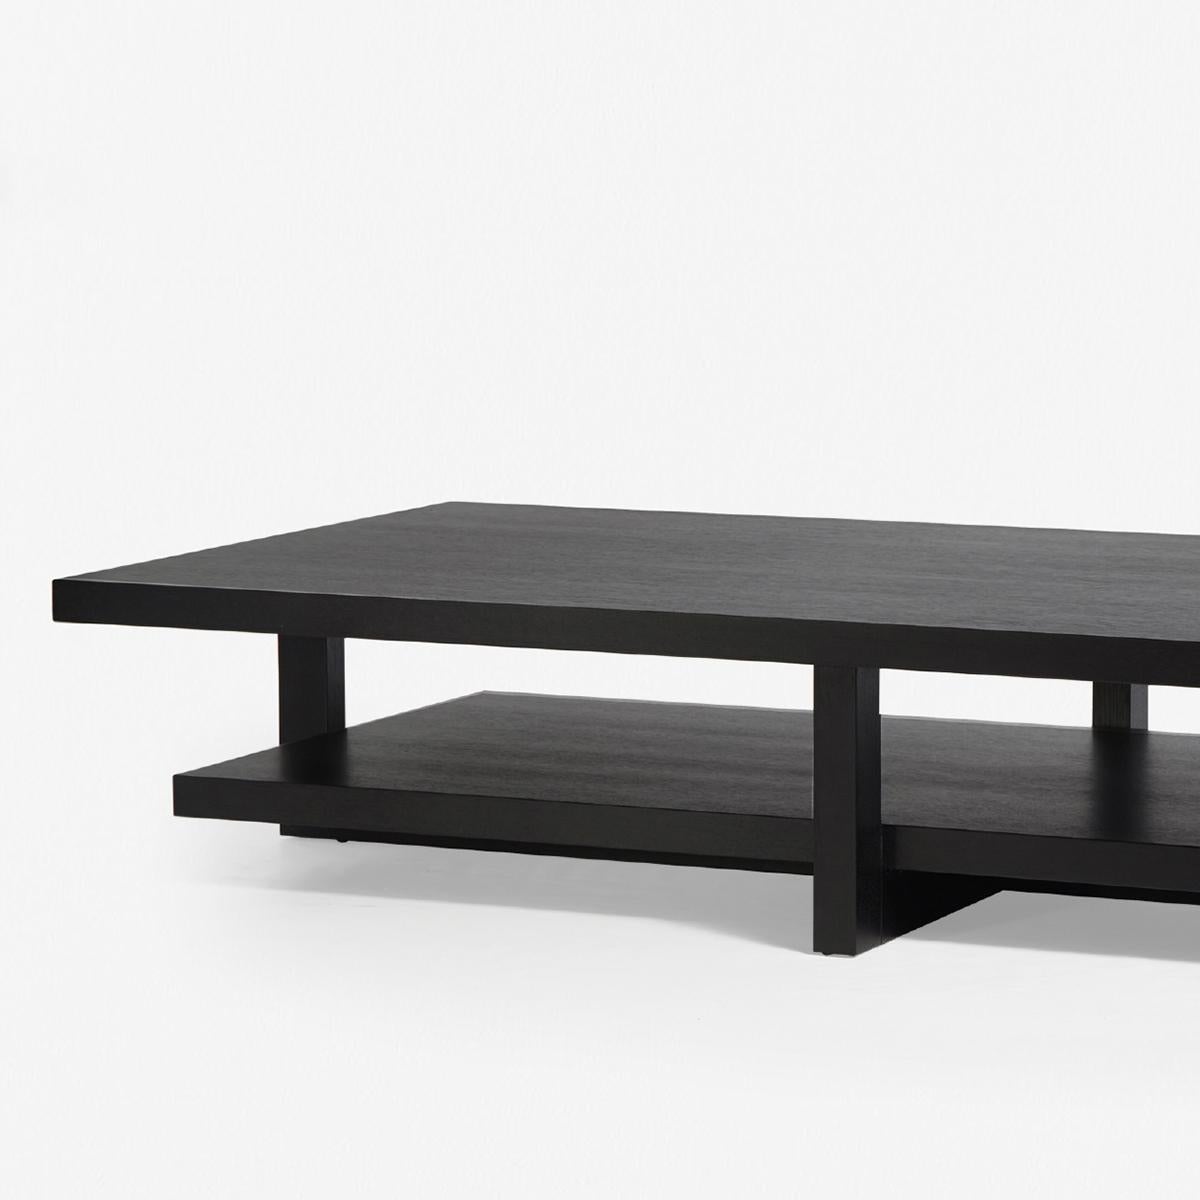 Coffee table shadow double with black oak veneer
tabletop and with black oak veneer base.
Available in:
L130xD70xH38cm, price: 2650,00€.
L150xD80xH38cm, price: 3350,00€.
L180xD90xH38cm, price: 3850,00€.
L200xD100xH38cm, price: 4650,00€.